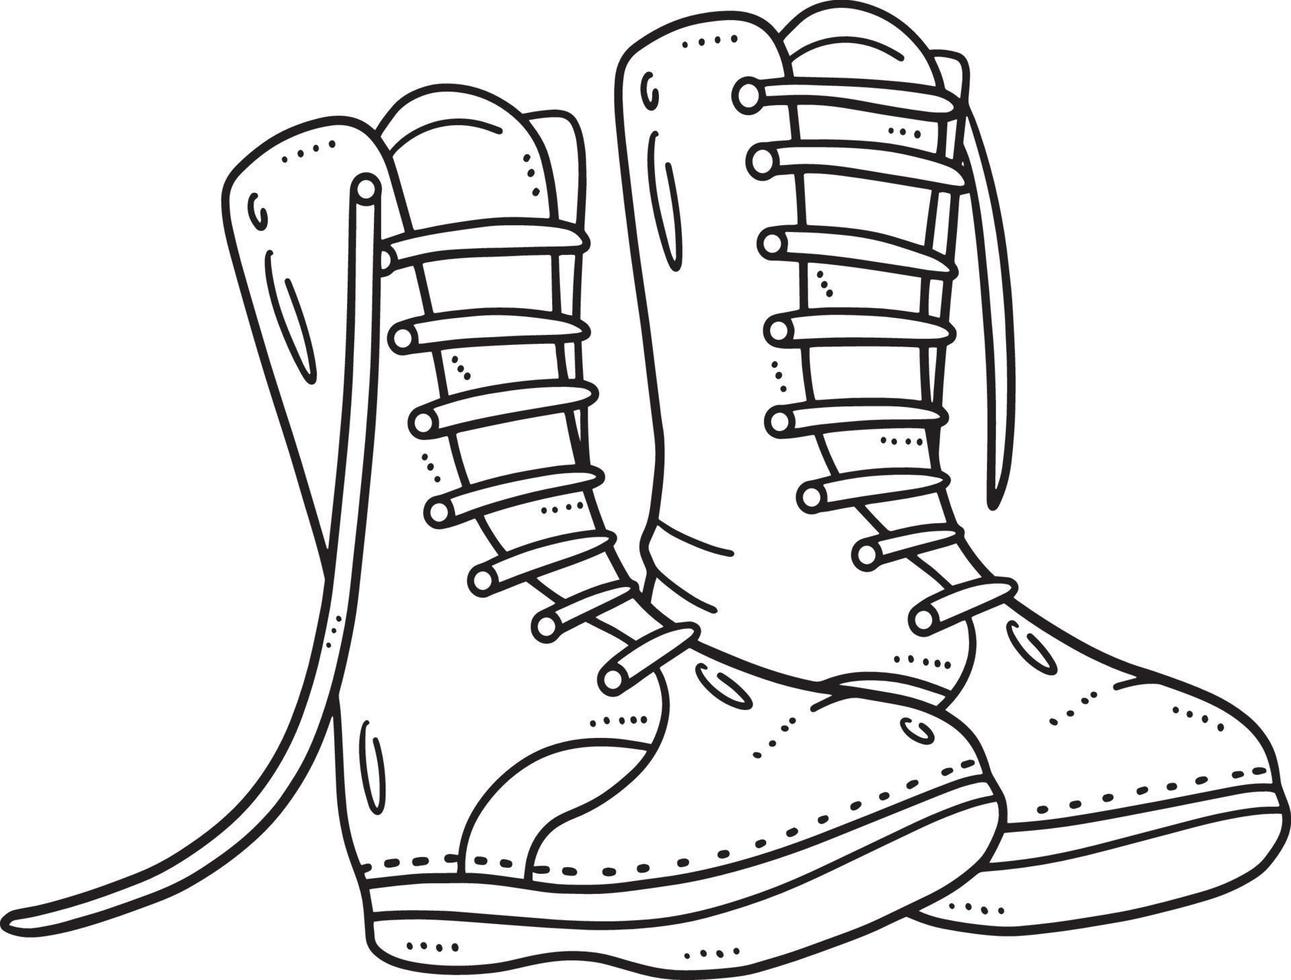 Combat Boots Isolated Coloring Page for Kids vector